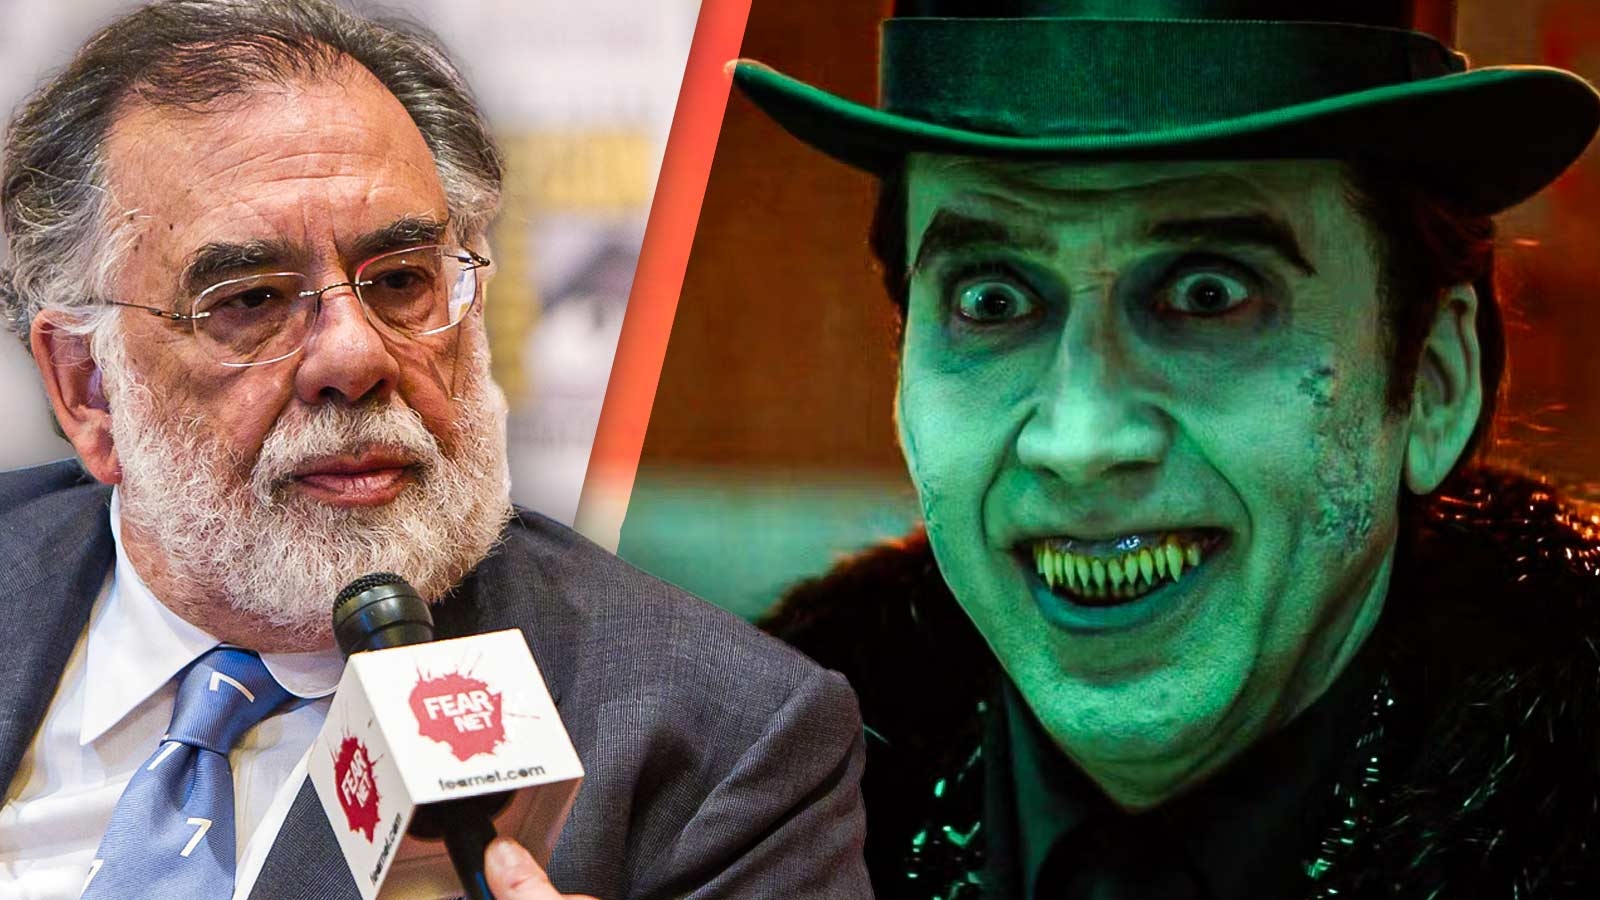 “Just make sure he’s very handsome”: Francis Ford Coppola Had the Weirdest Advice for Nicolas Cage after Taking on the Role of Dracula